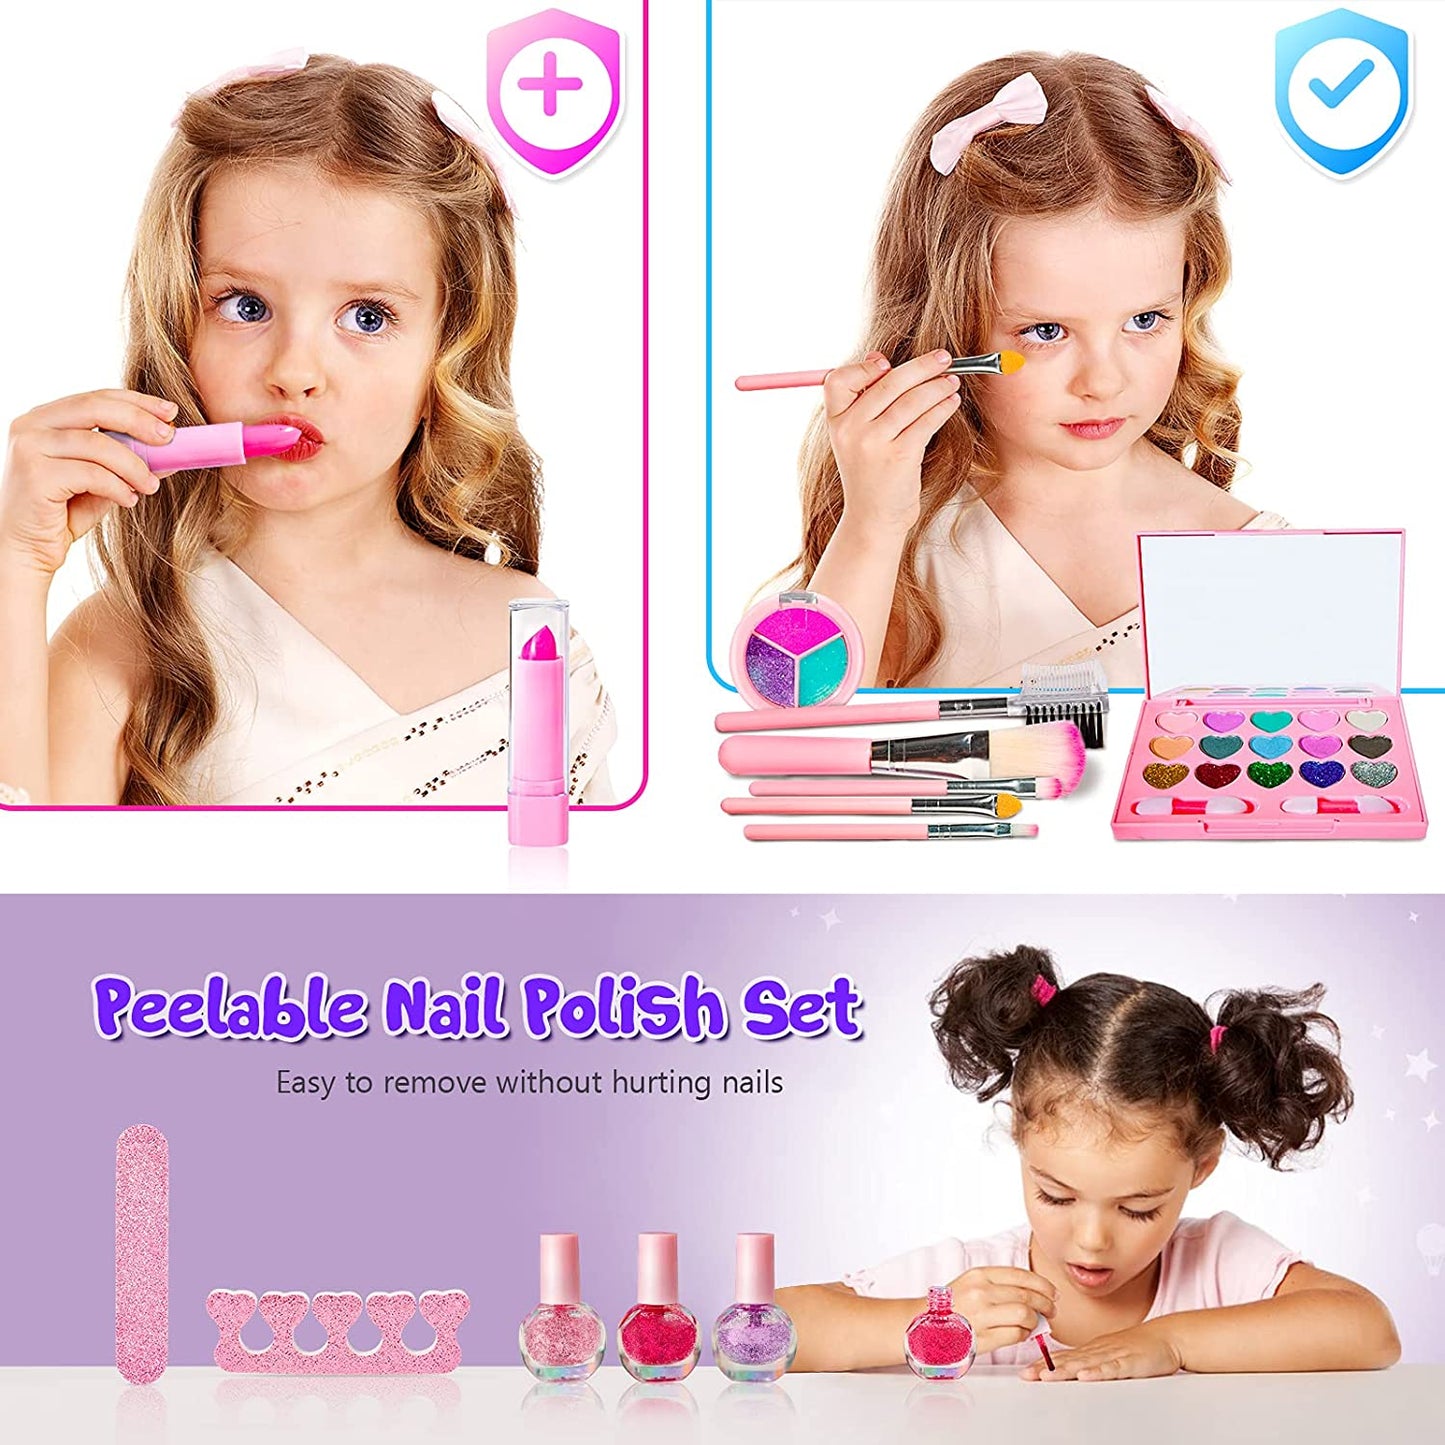 Kids Makeup Kit for Girls 2021 New Upgrade, Pretend Play Toys Washable Make Up Set with Cosmetics Bag Lipstick,Brush,Mirror, Halloween Christmas Party Birthday Gift Toys for Girl Aged 3 4 5 6 7 8